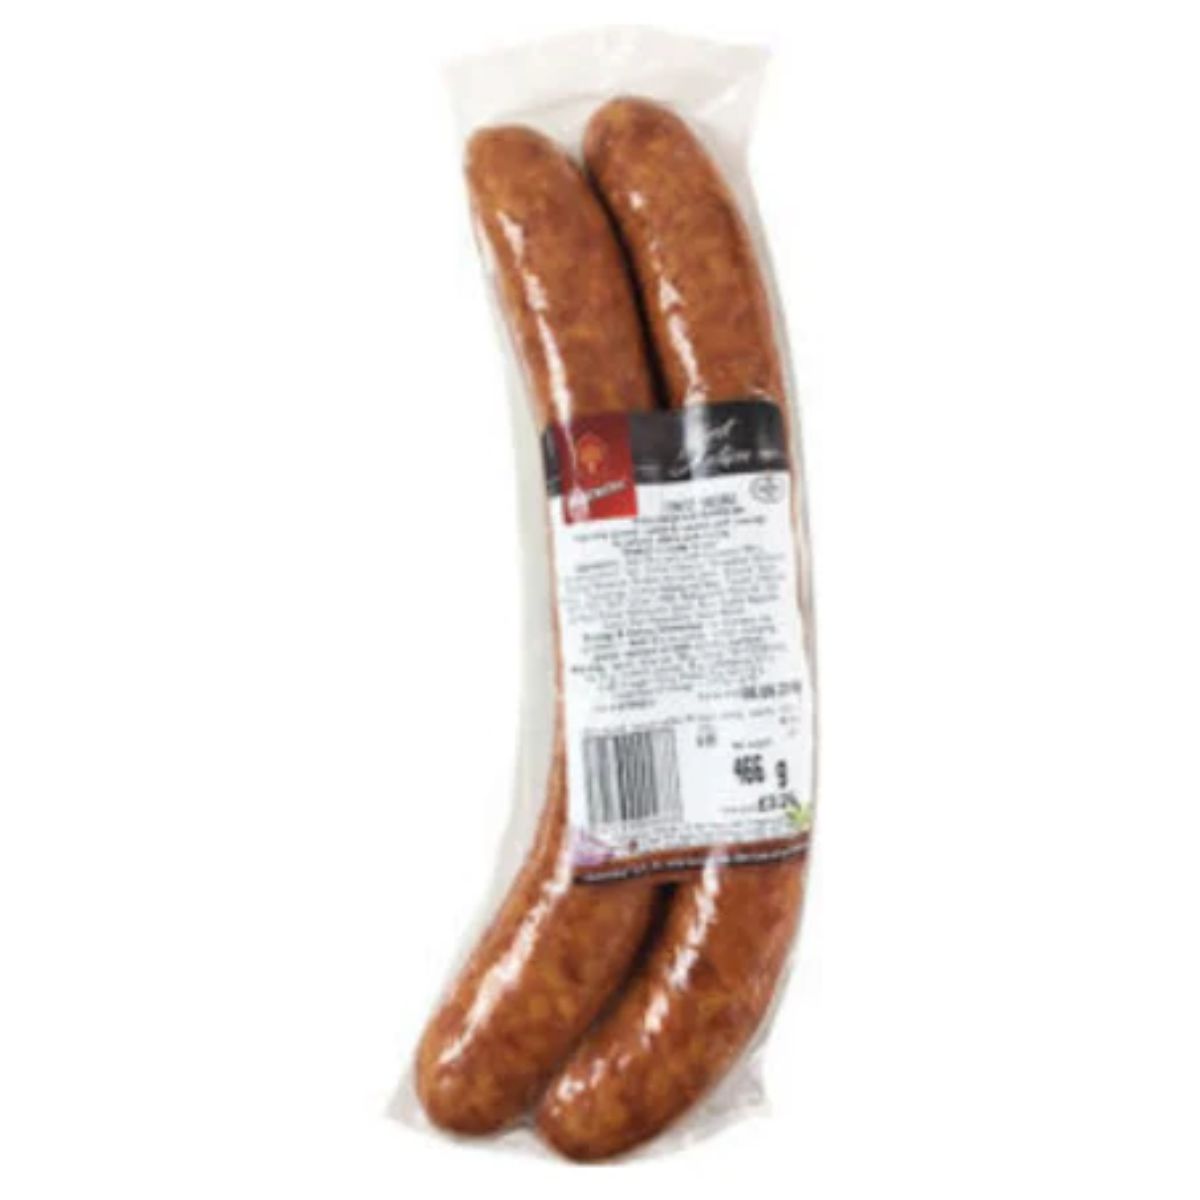 Two Sokolow - Finest Sausages - 376g (varies) in a package on a white background.